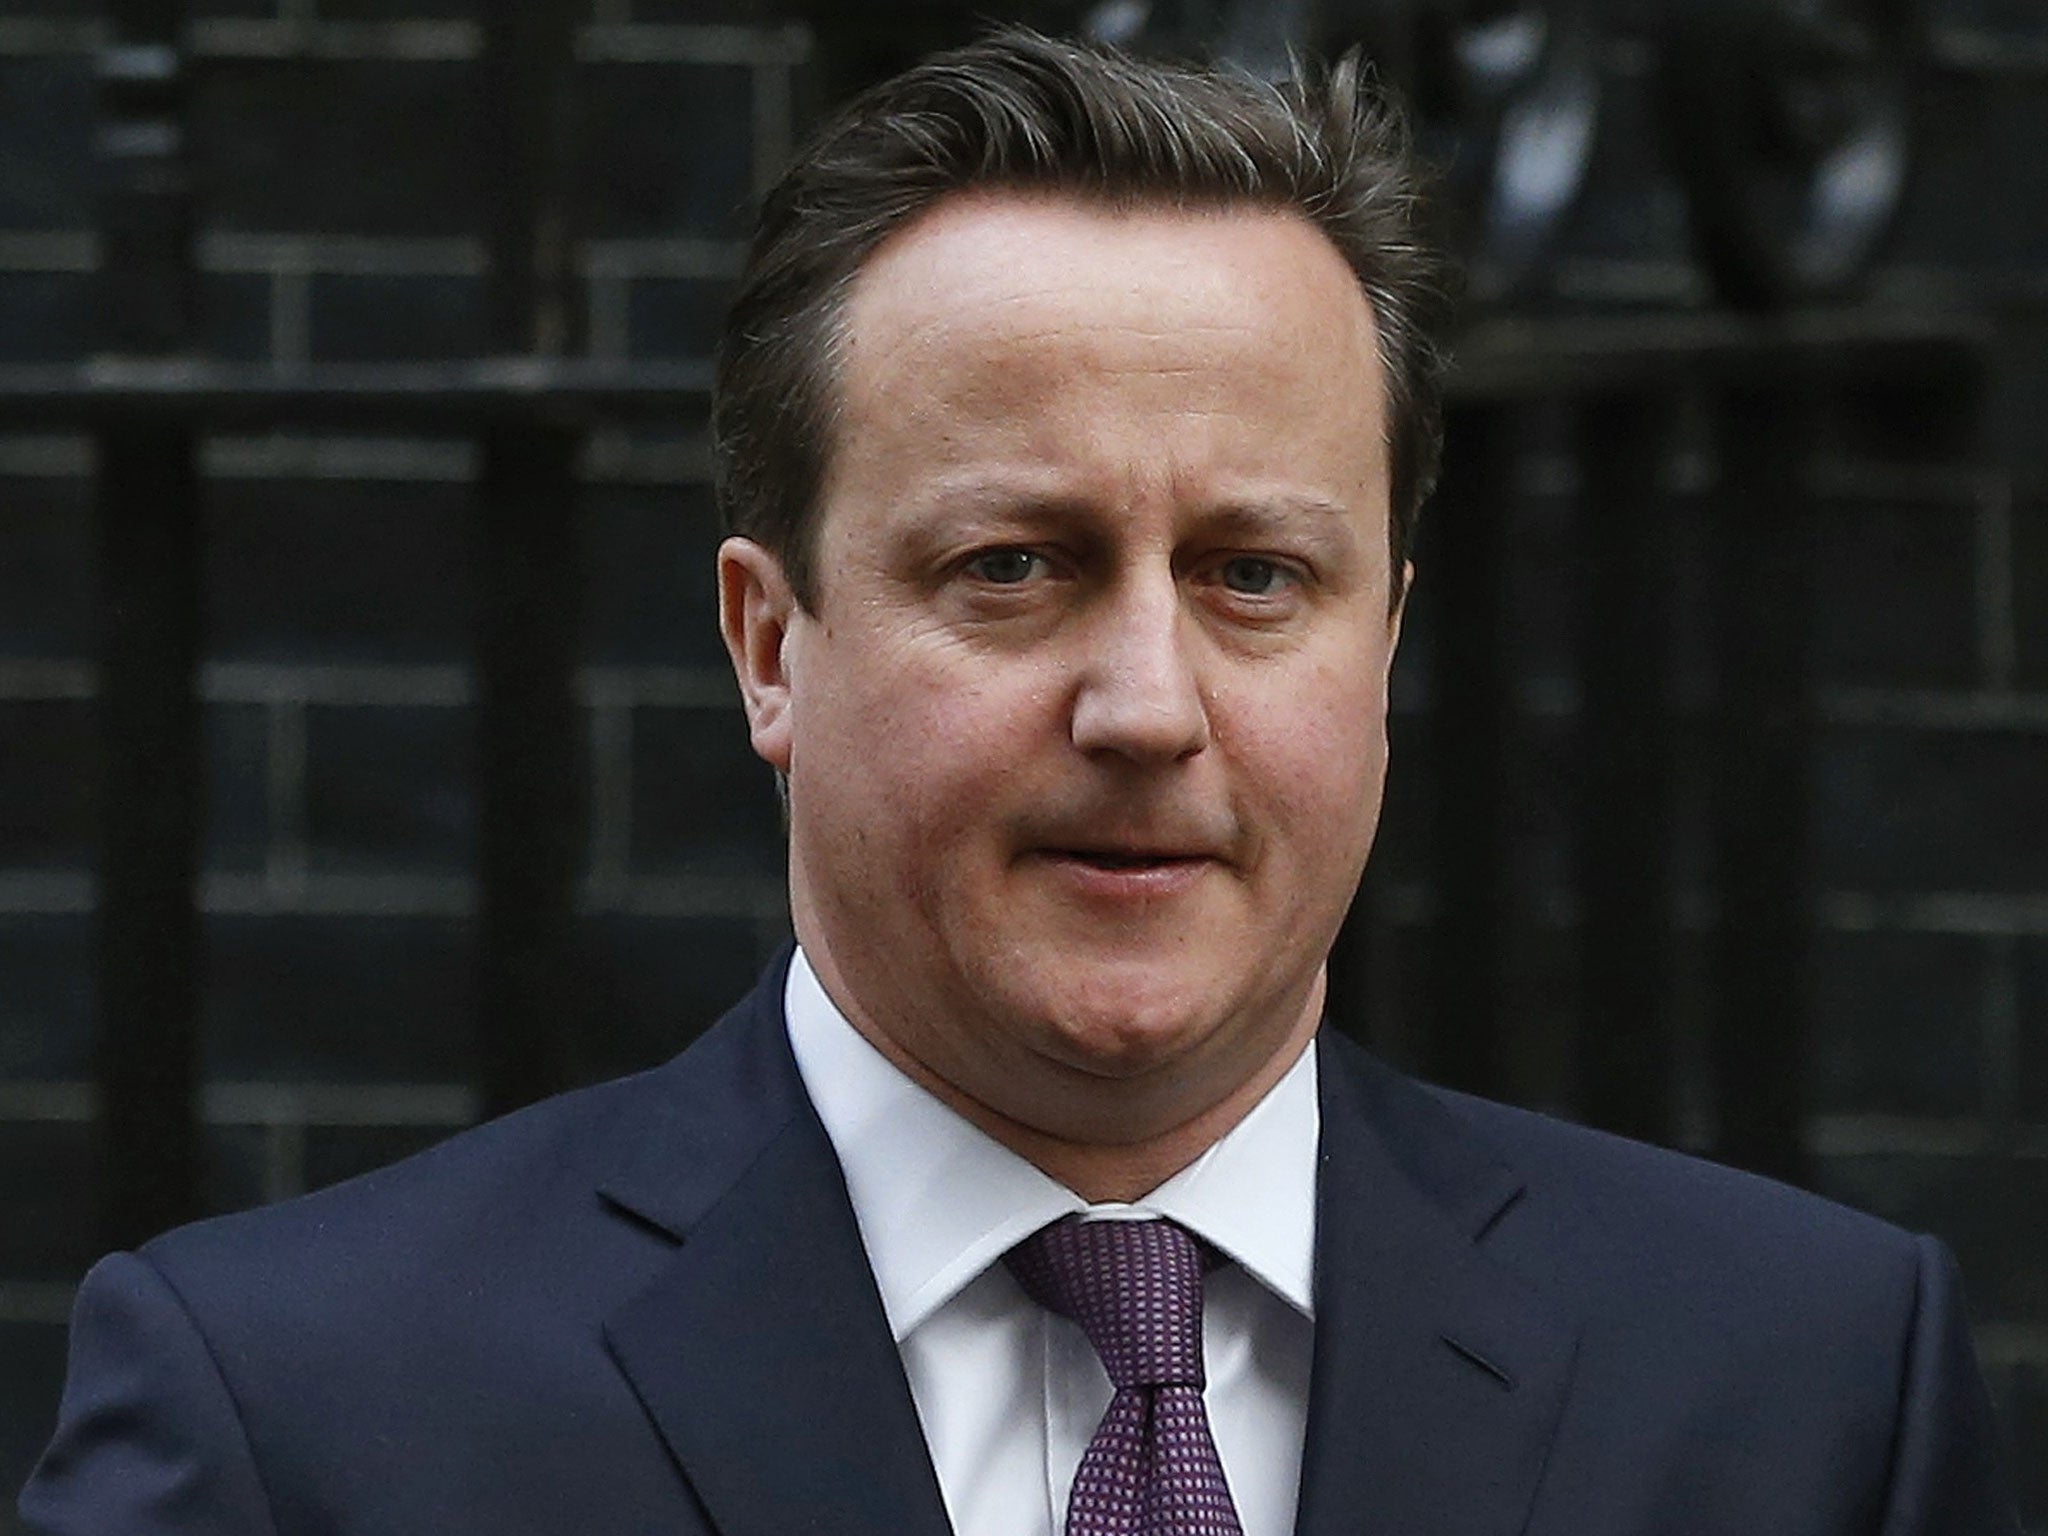 According to Downing Street, Prime Minister David Cameron has cancelled his long-awaited speech on Europe due to the Algerian crisis